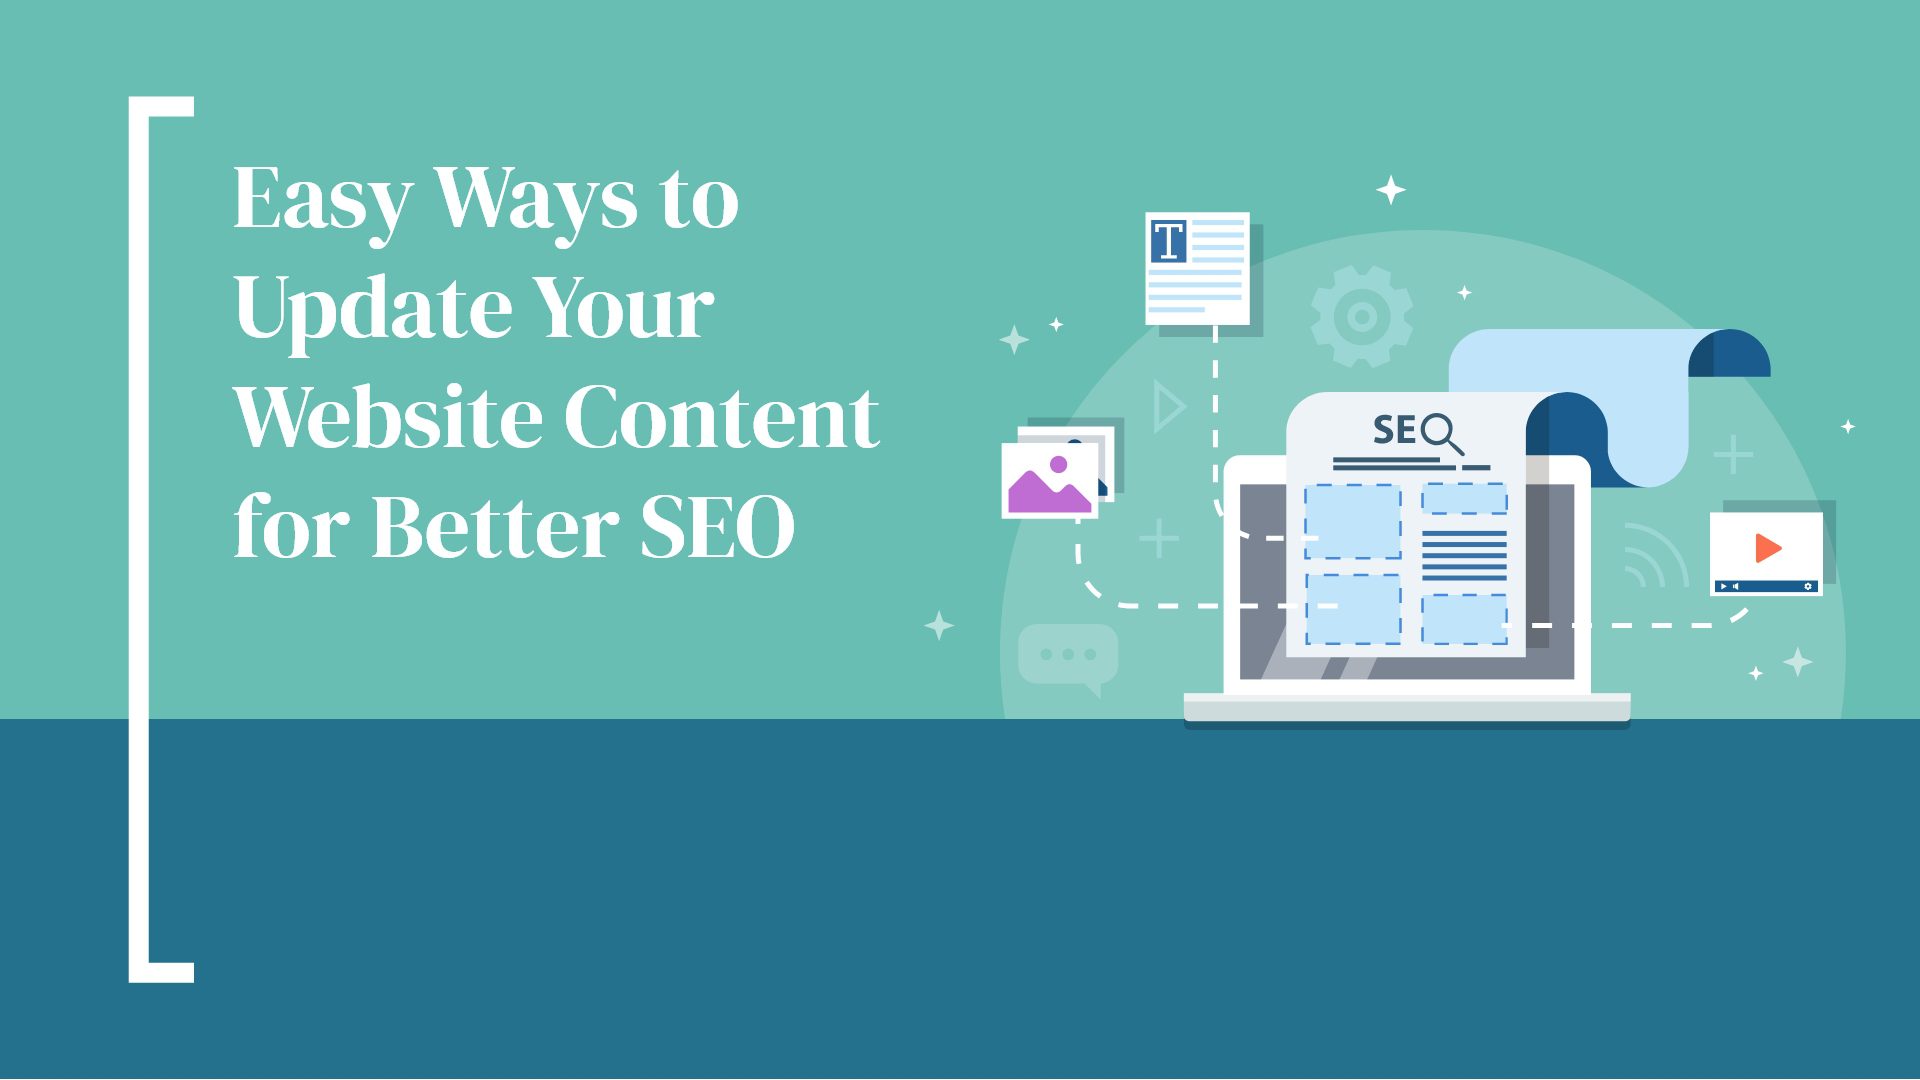 Easy Ways to Update Your Website Content for Better SEO